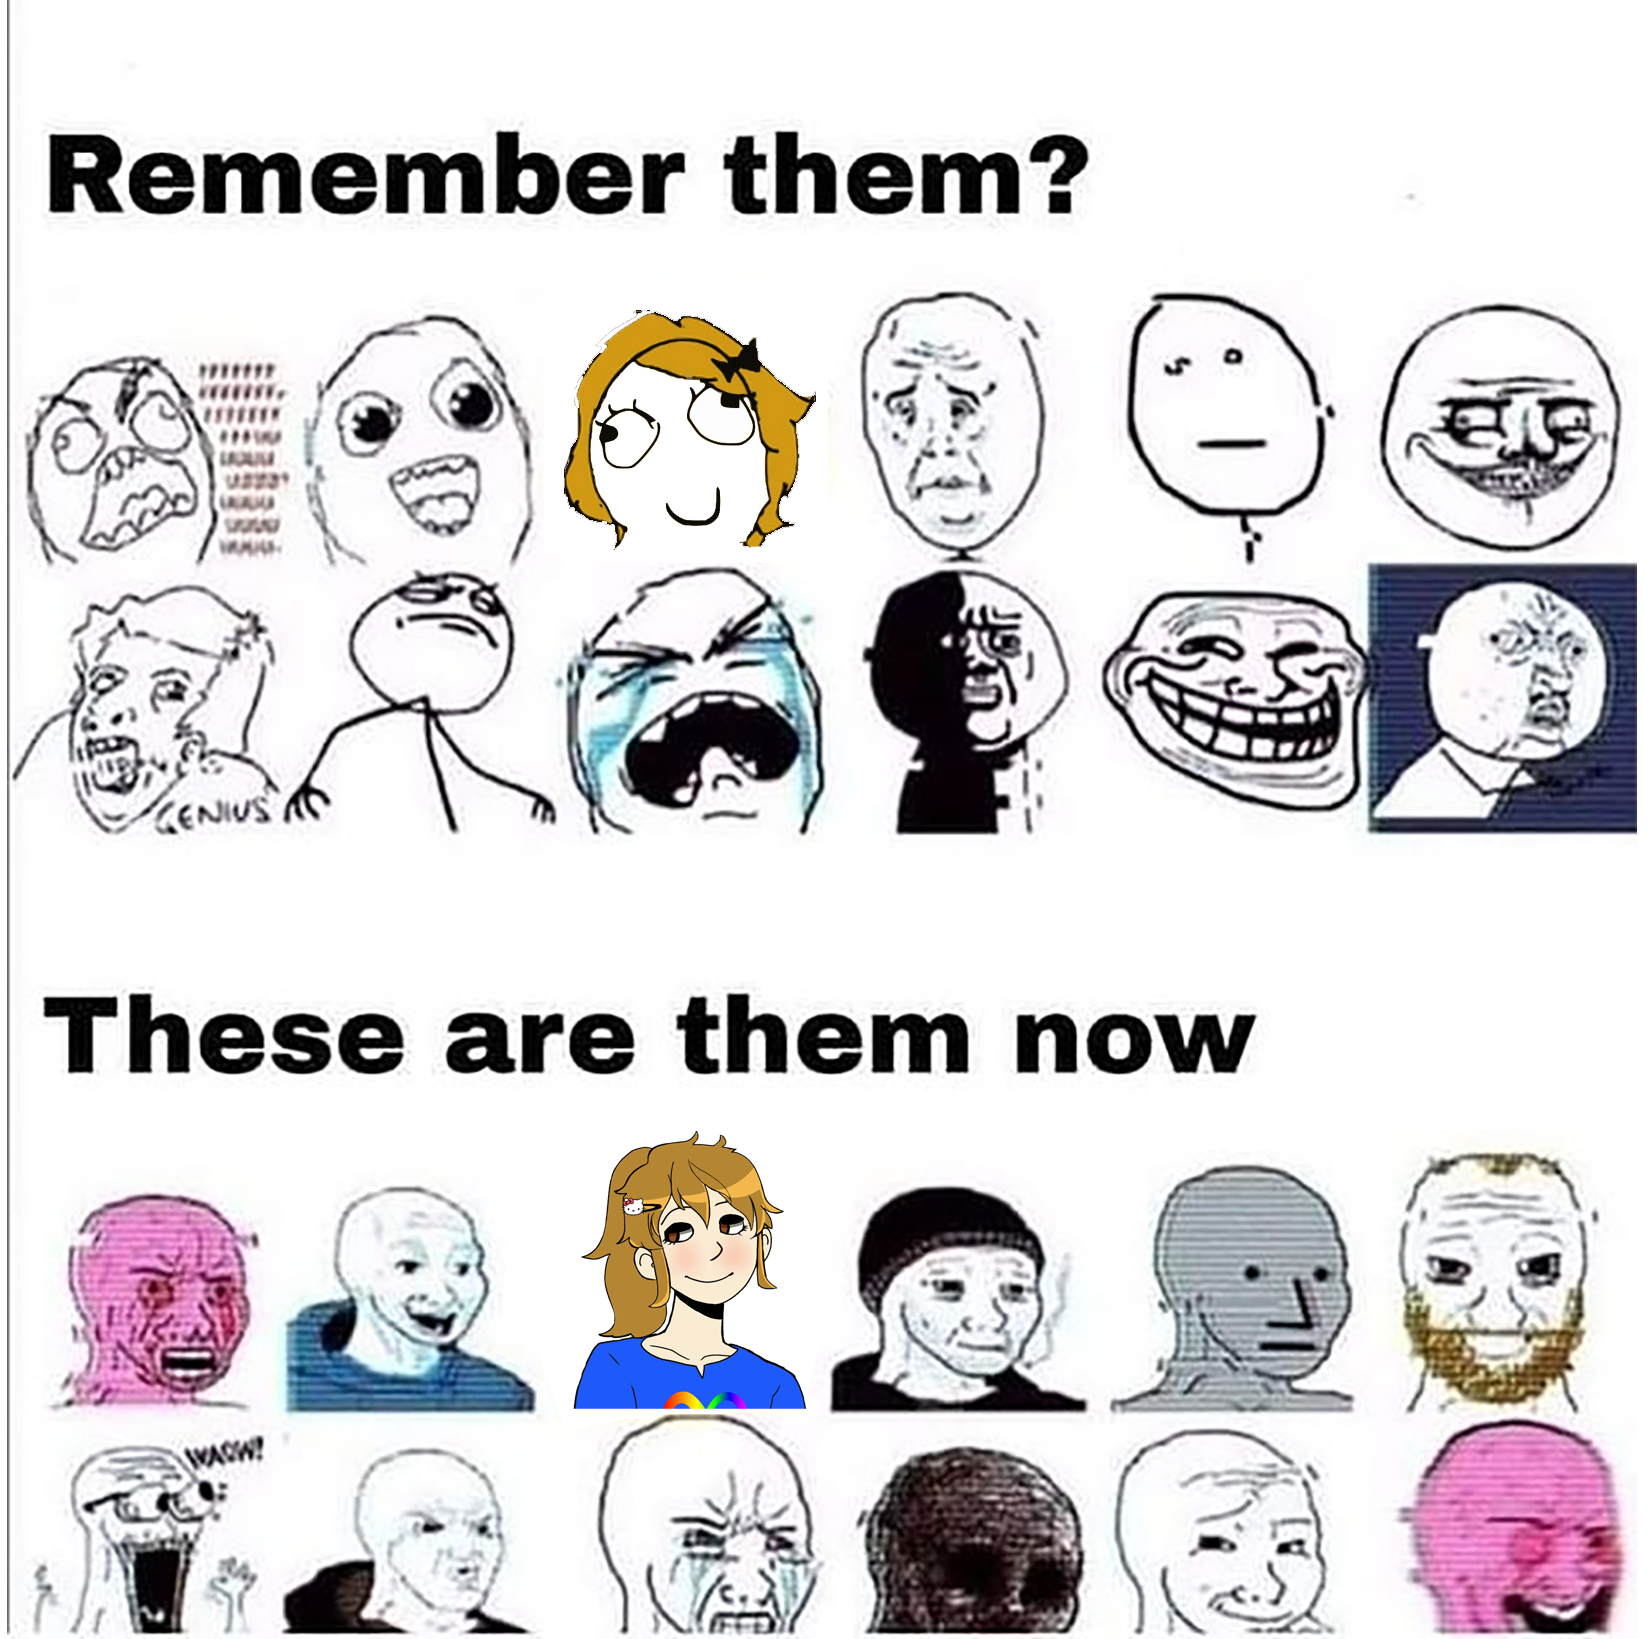 funny memes - old drawing memes - Remember them? 102 Genius These are them now Waw! 31?